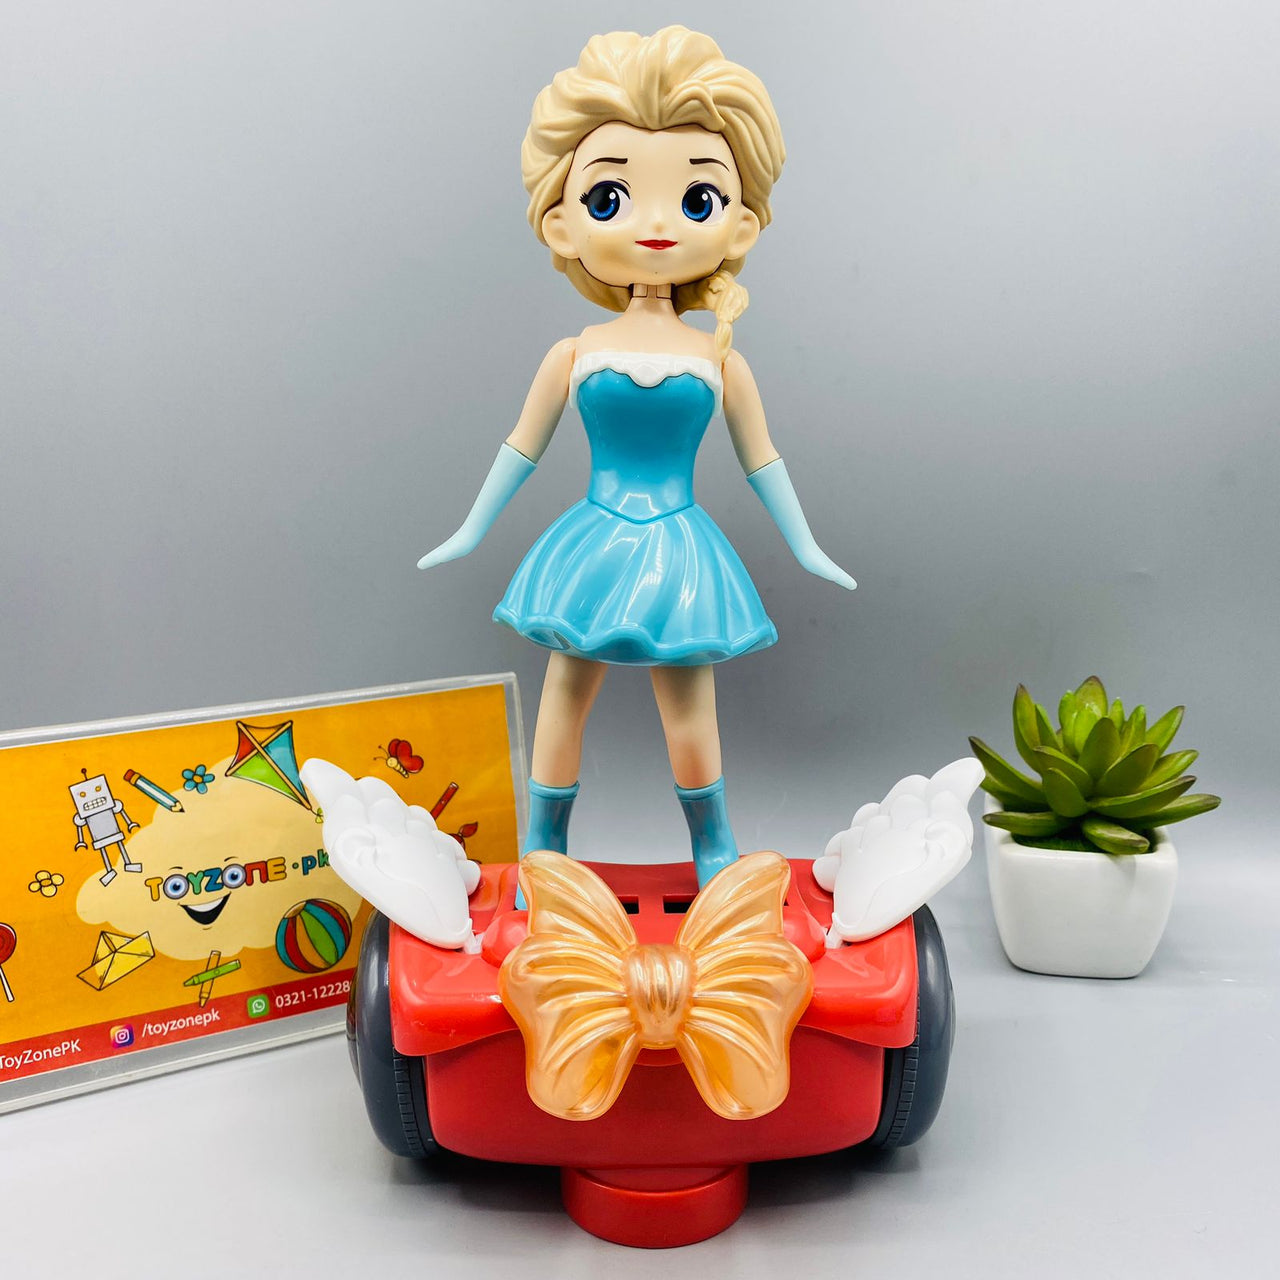 battery operated ice princess with balance car